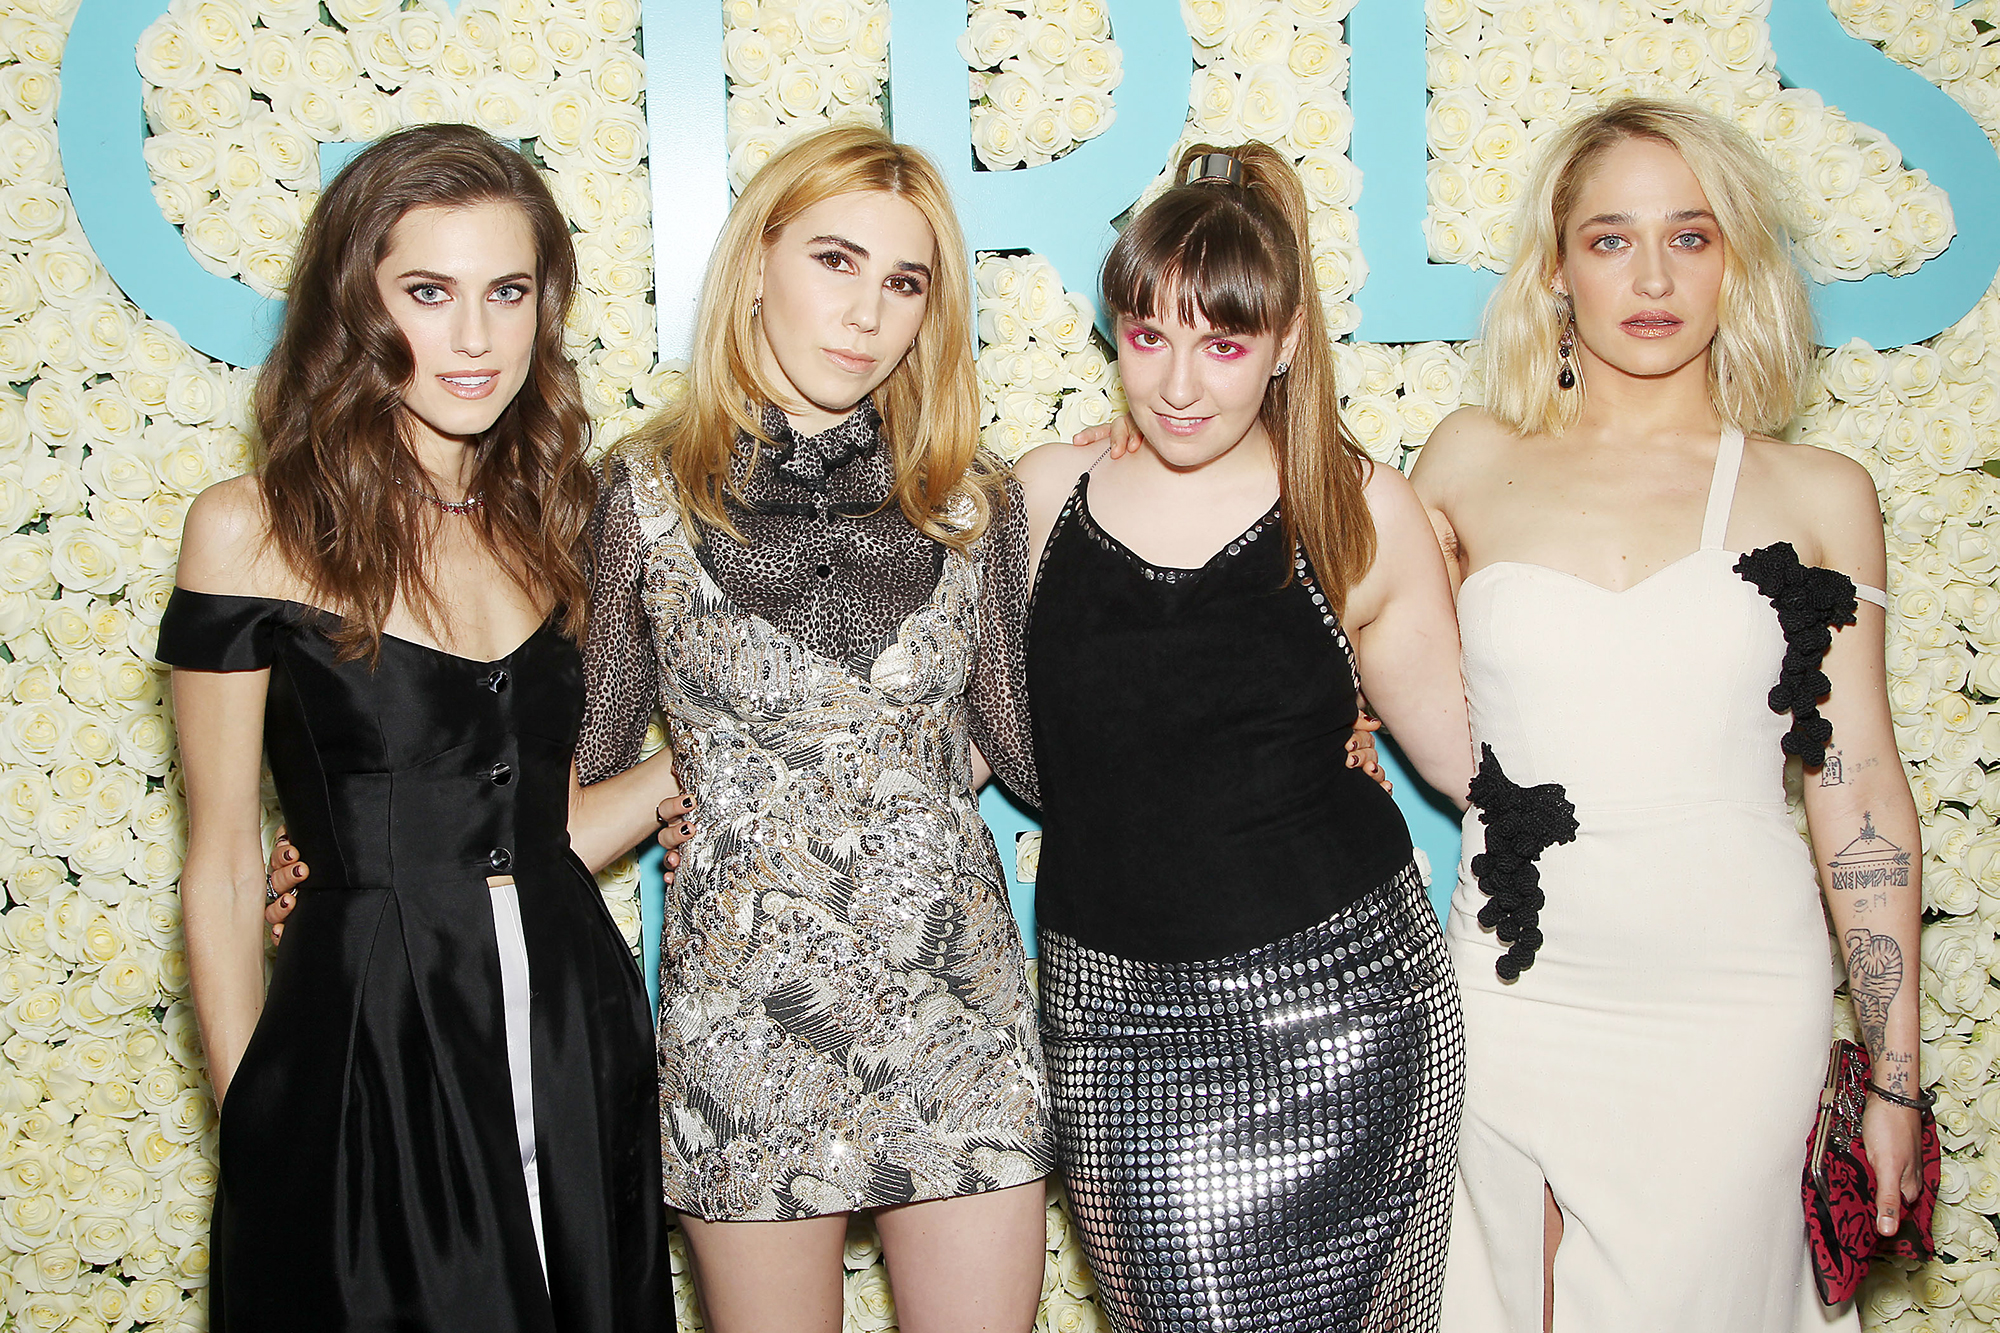 Zosia Mamet on ‘Girls’ Cast: We ‘Don’t Really’ Hang Out Anymore